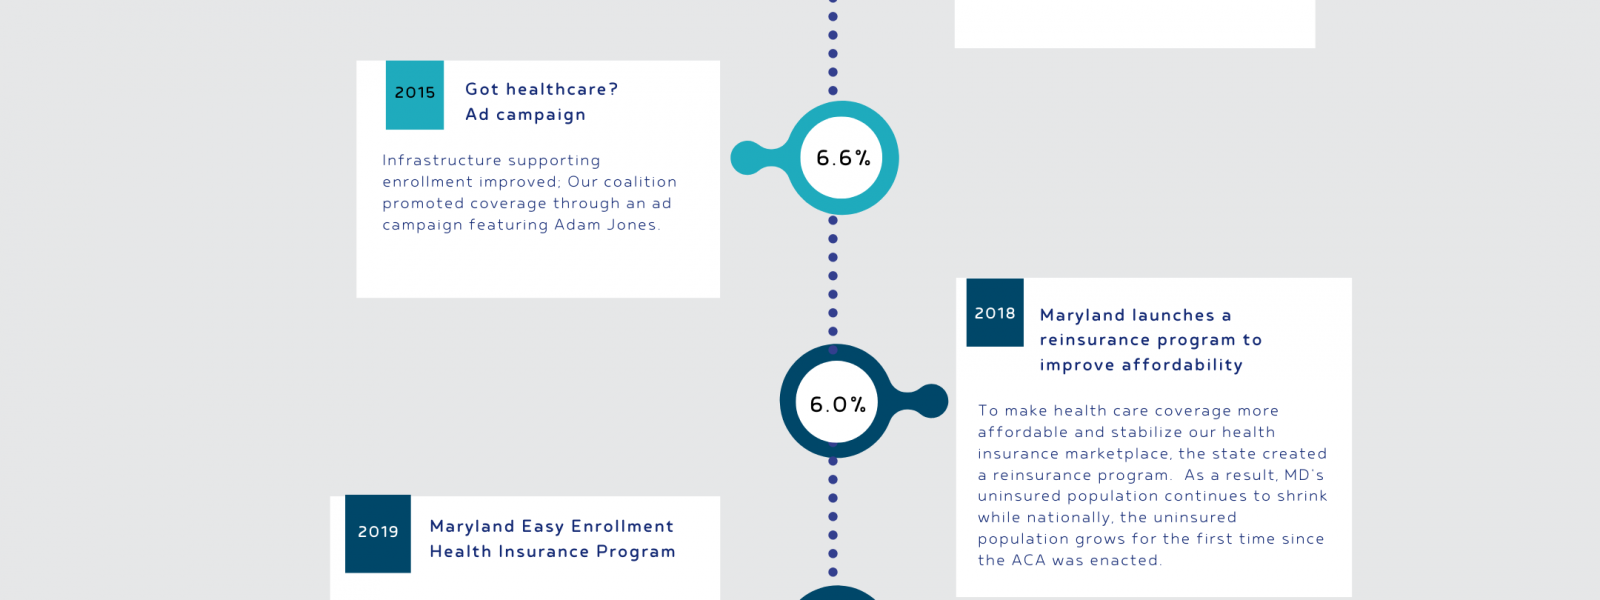 Infographic highlighting dates and associated impact on Maryland's uninsured population 2012-2022